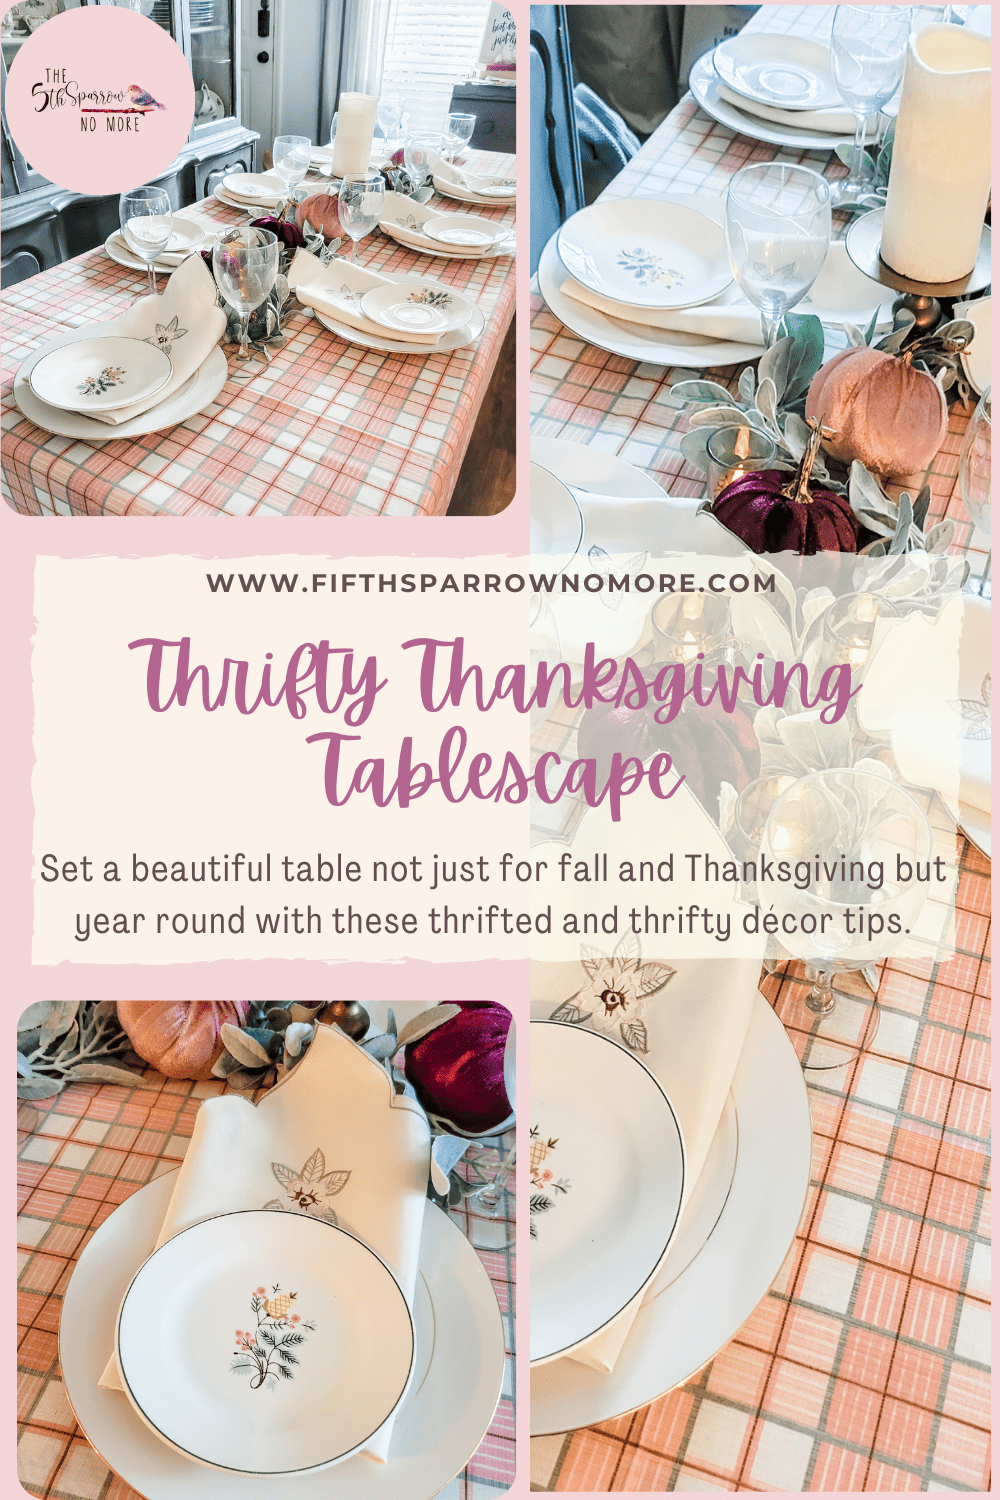 Thrifty and Thankful Table